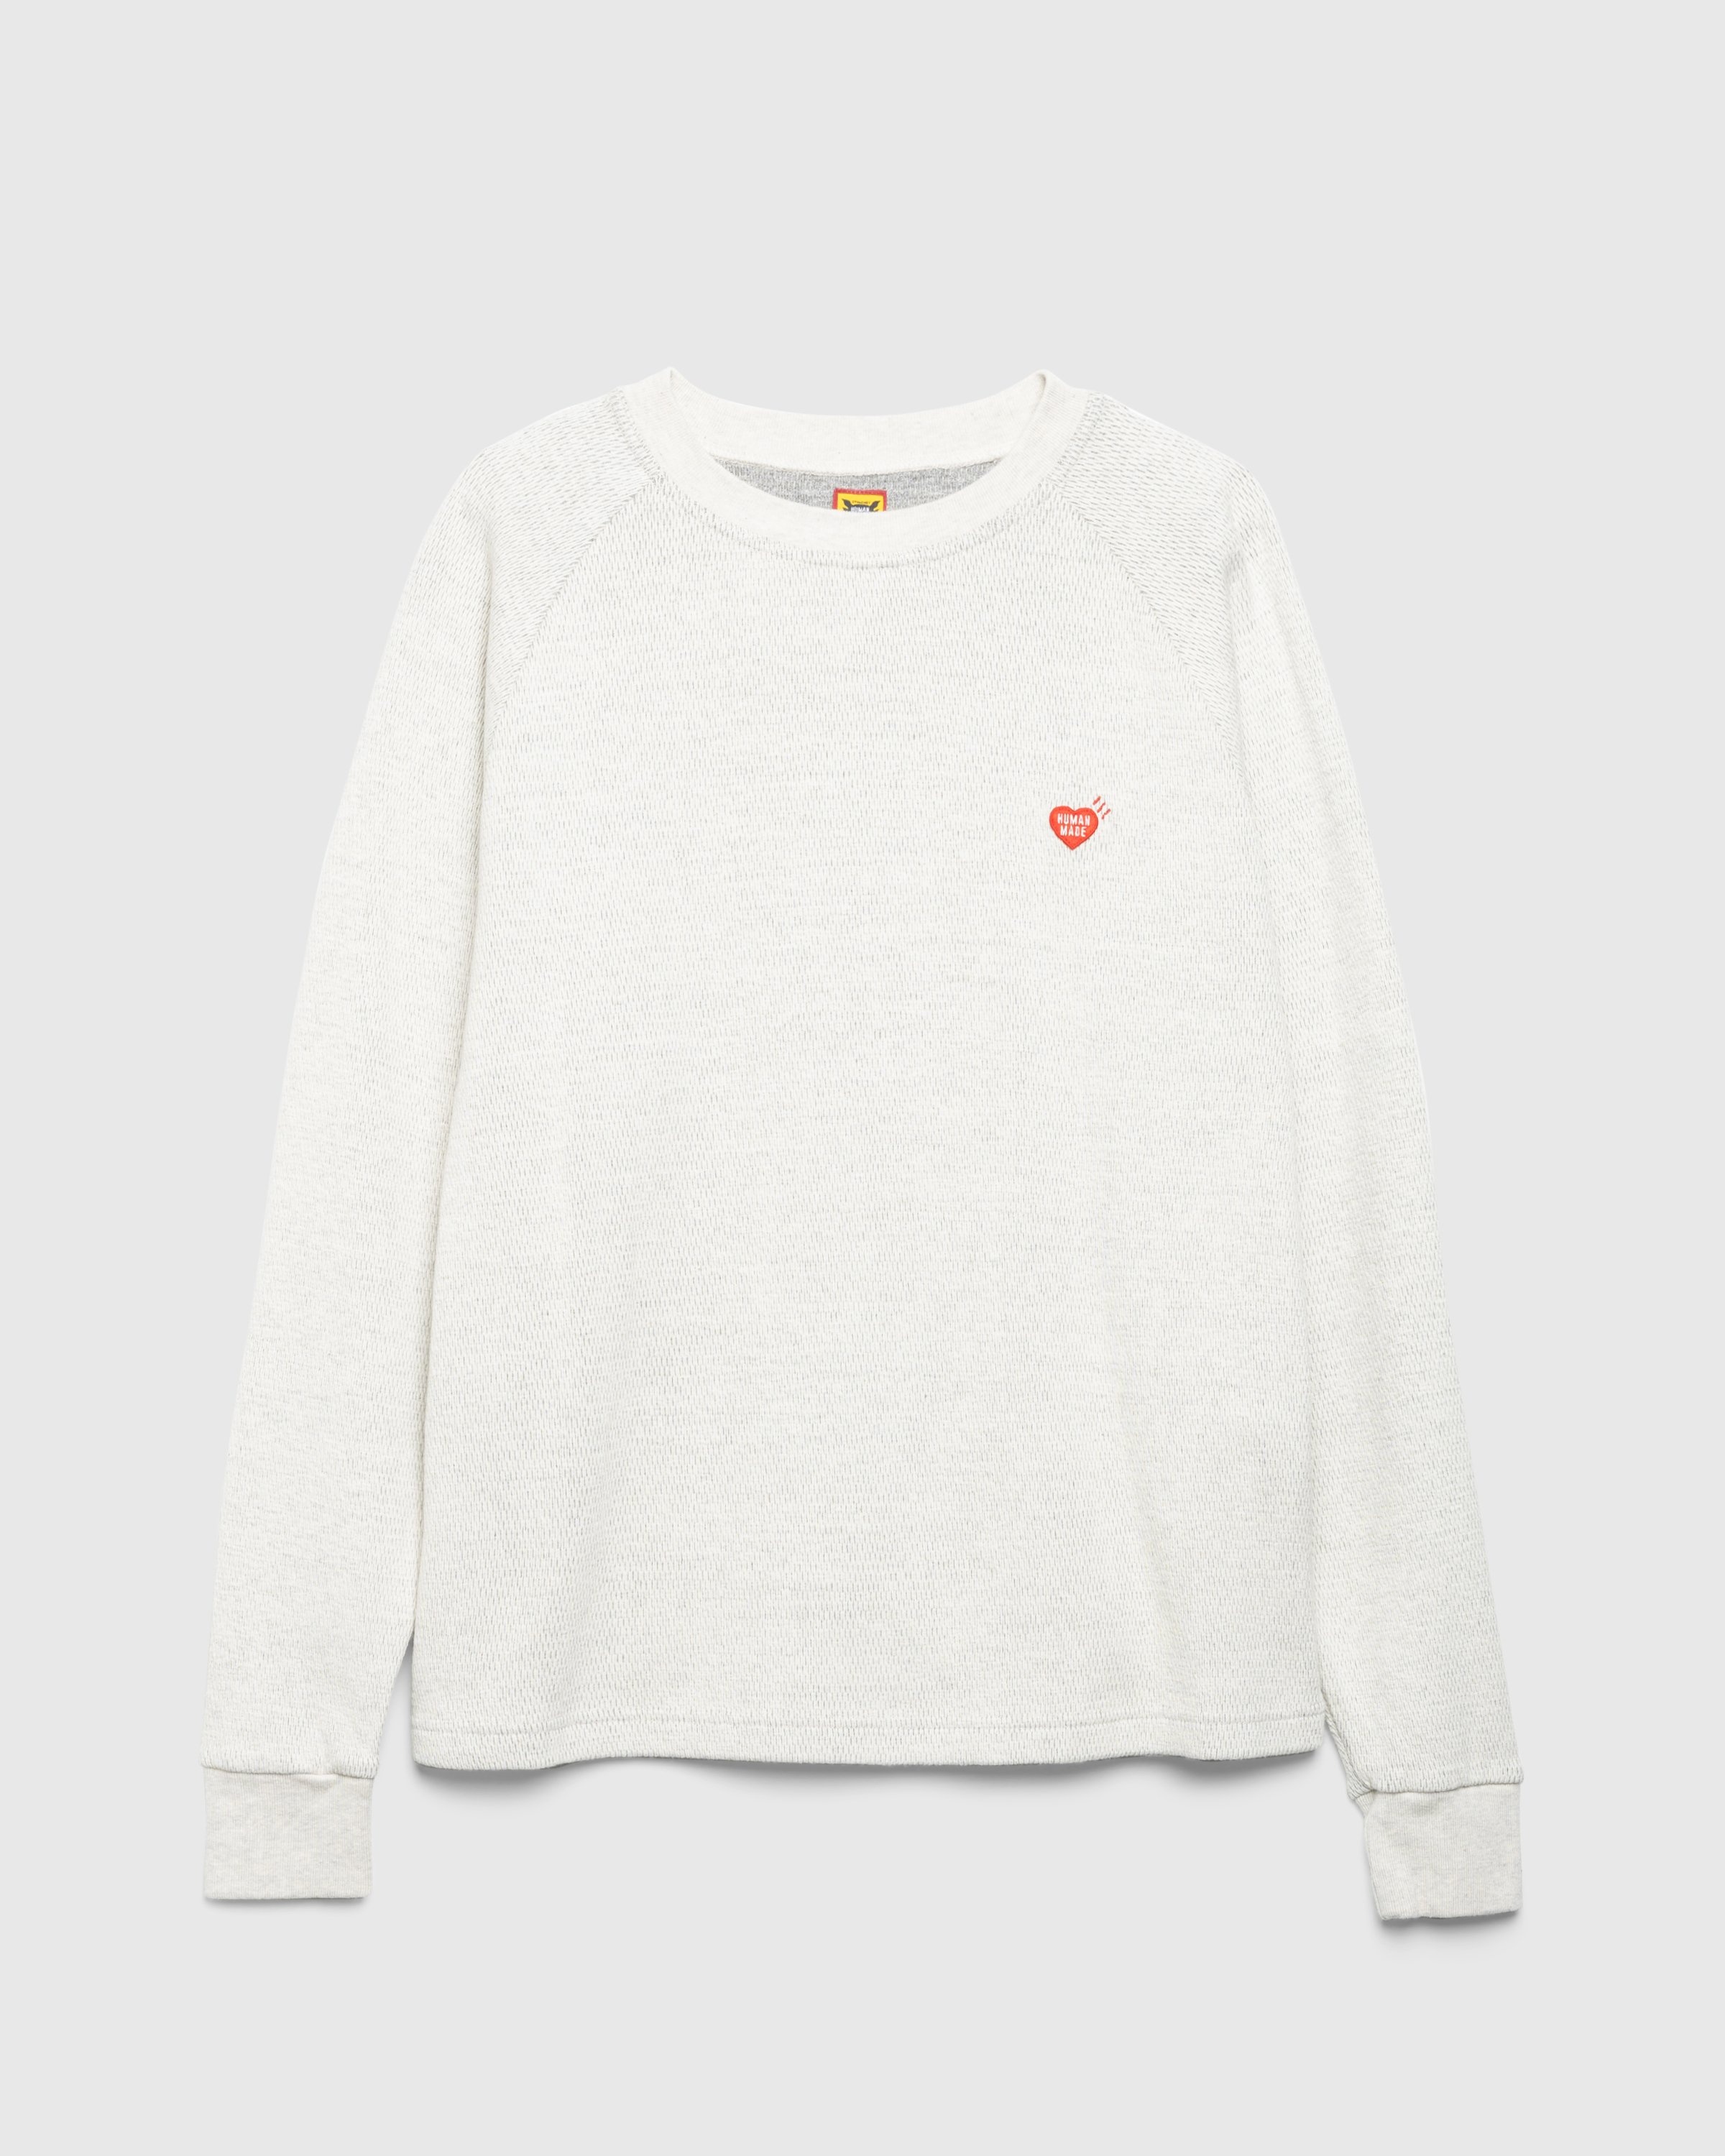 Long-sleeved thermal shirt in white